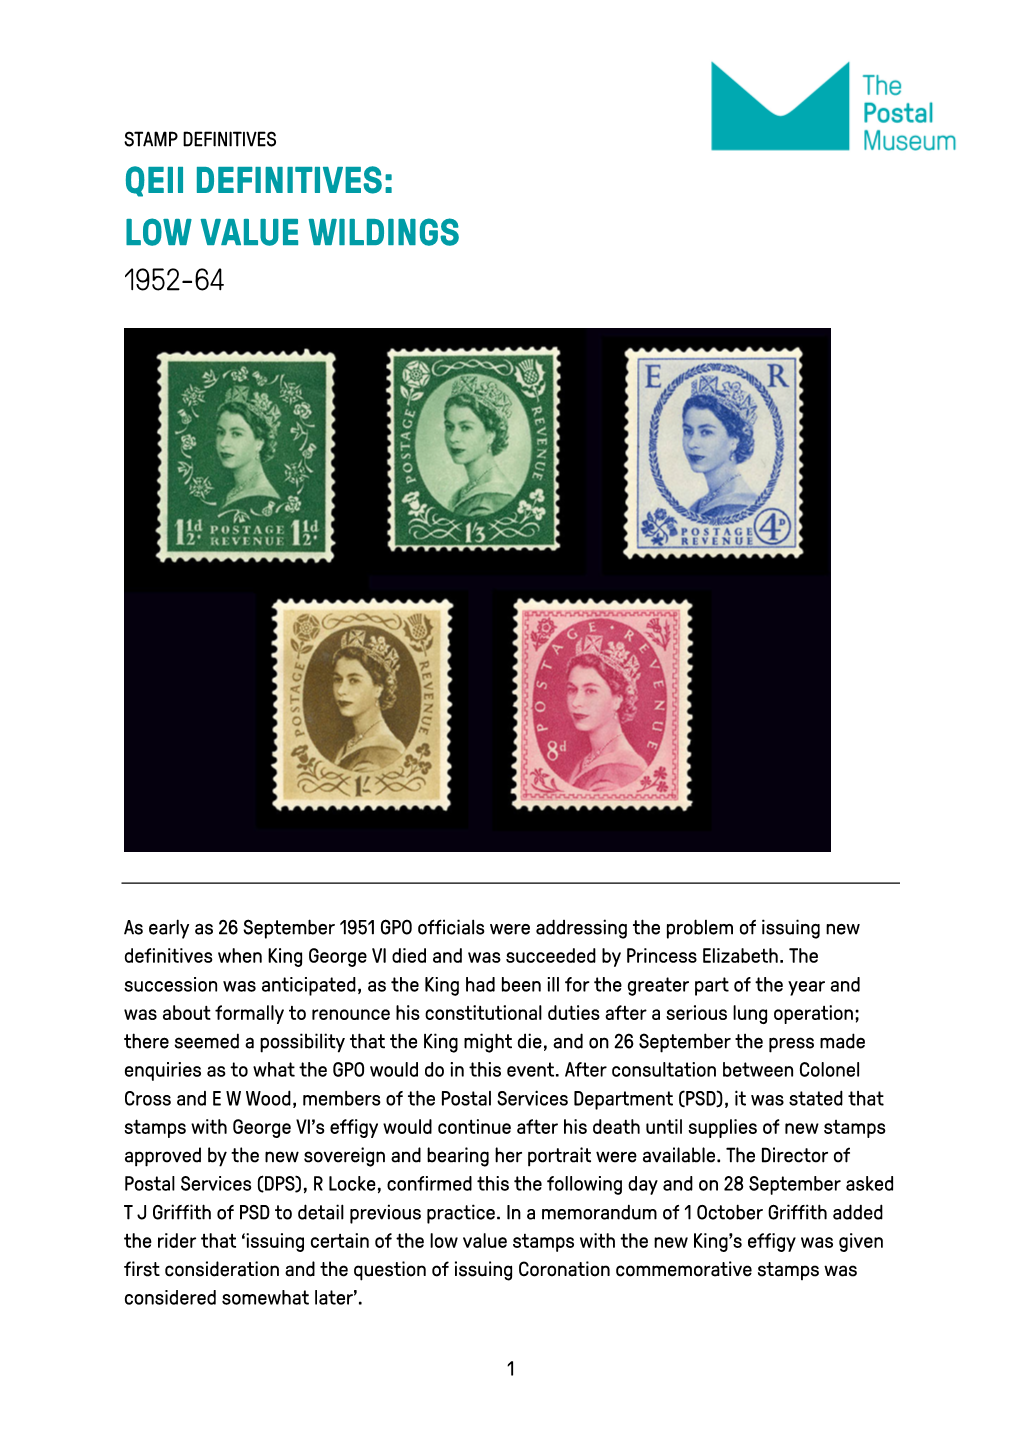 Qeii Definitives: Low Value Wildings 1952-64